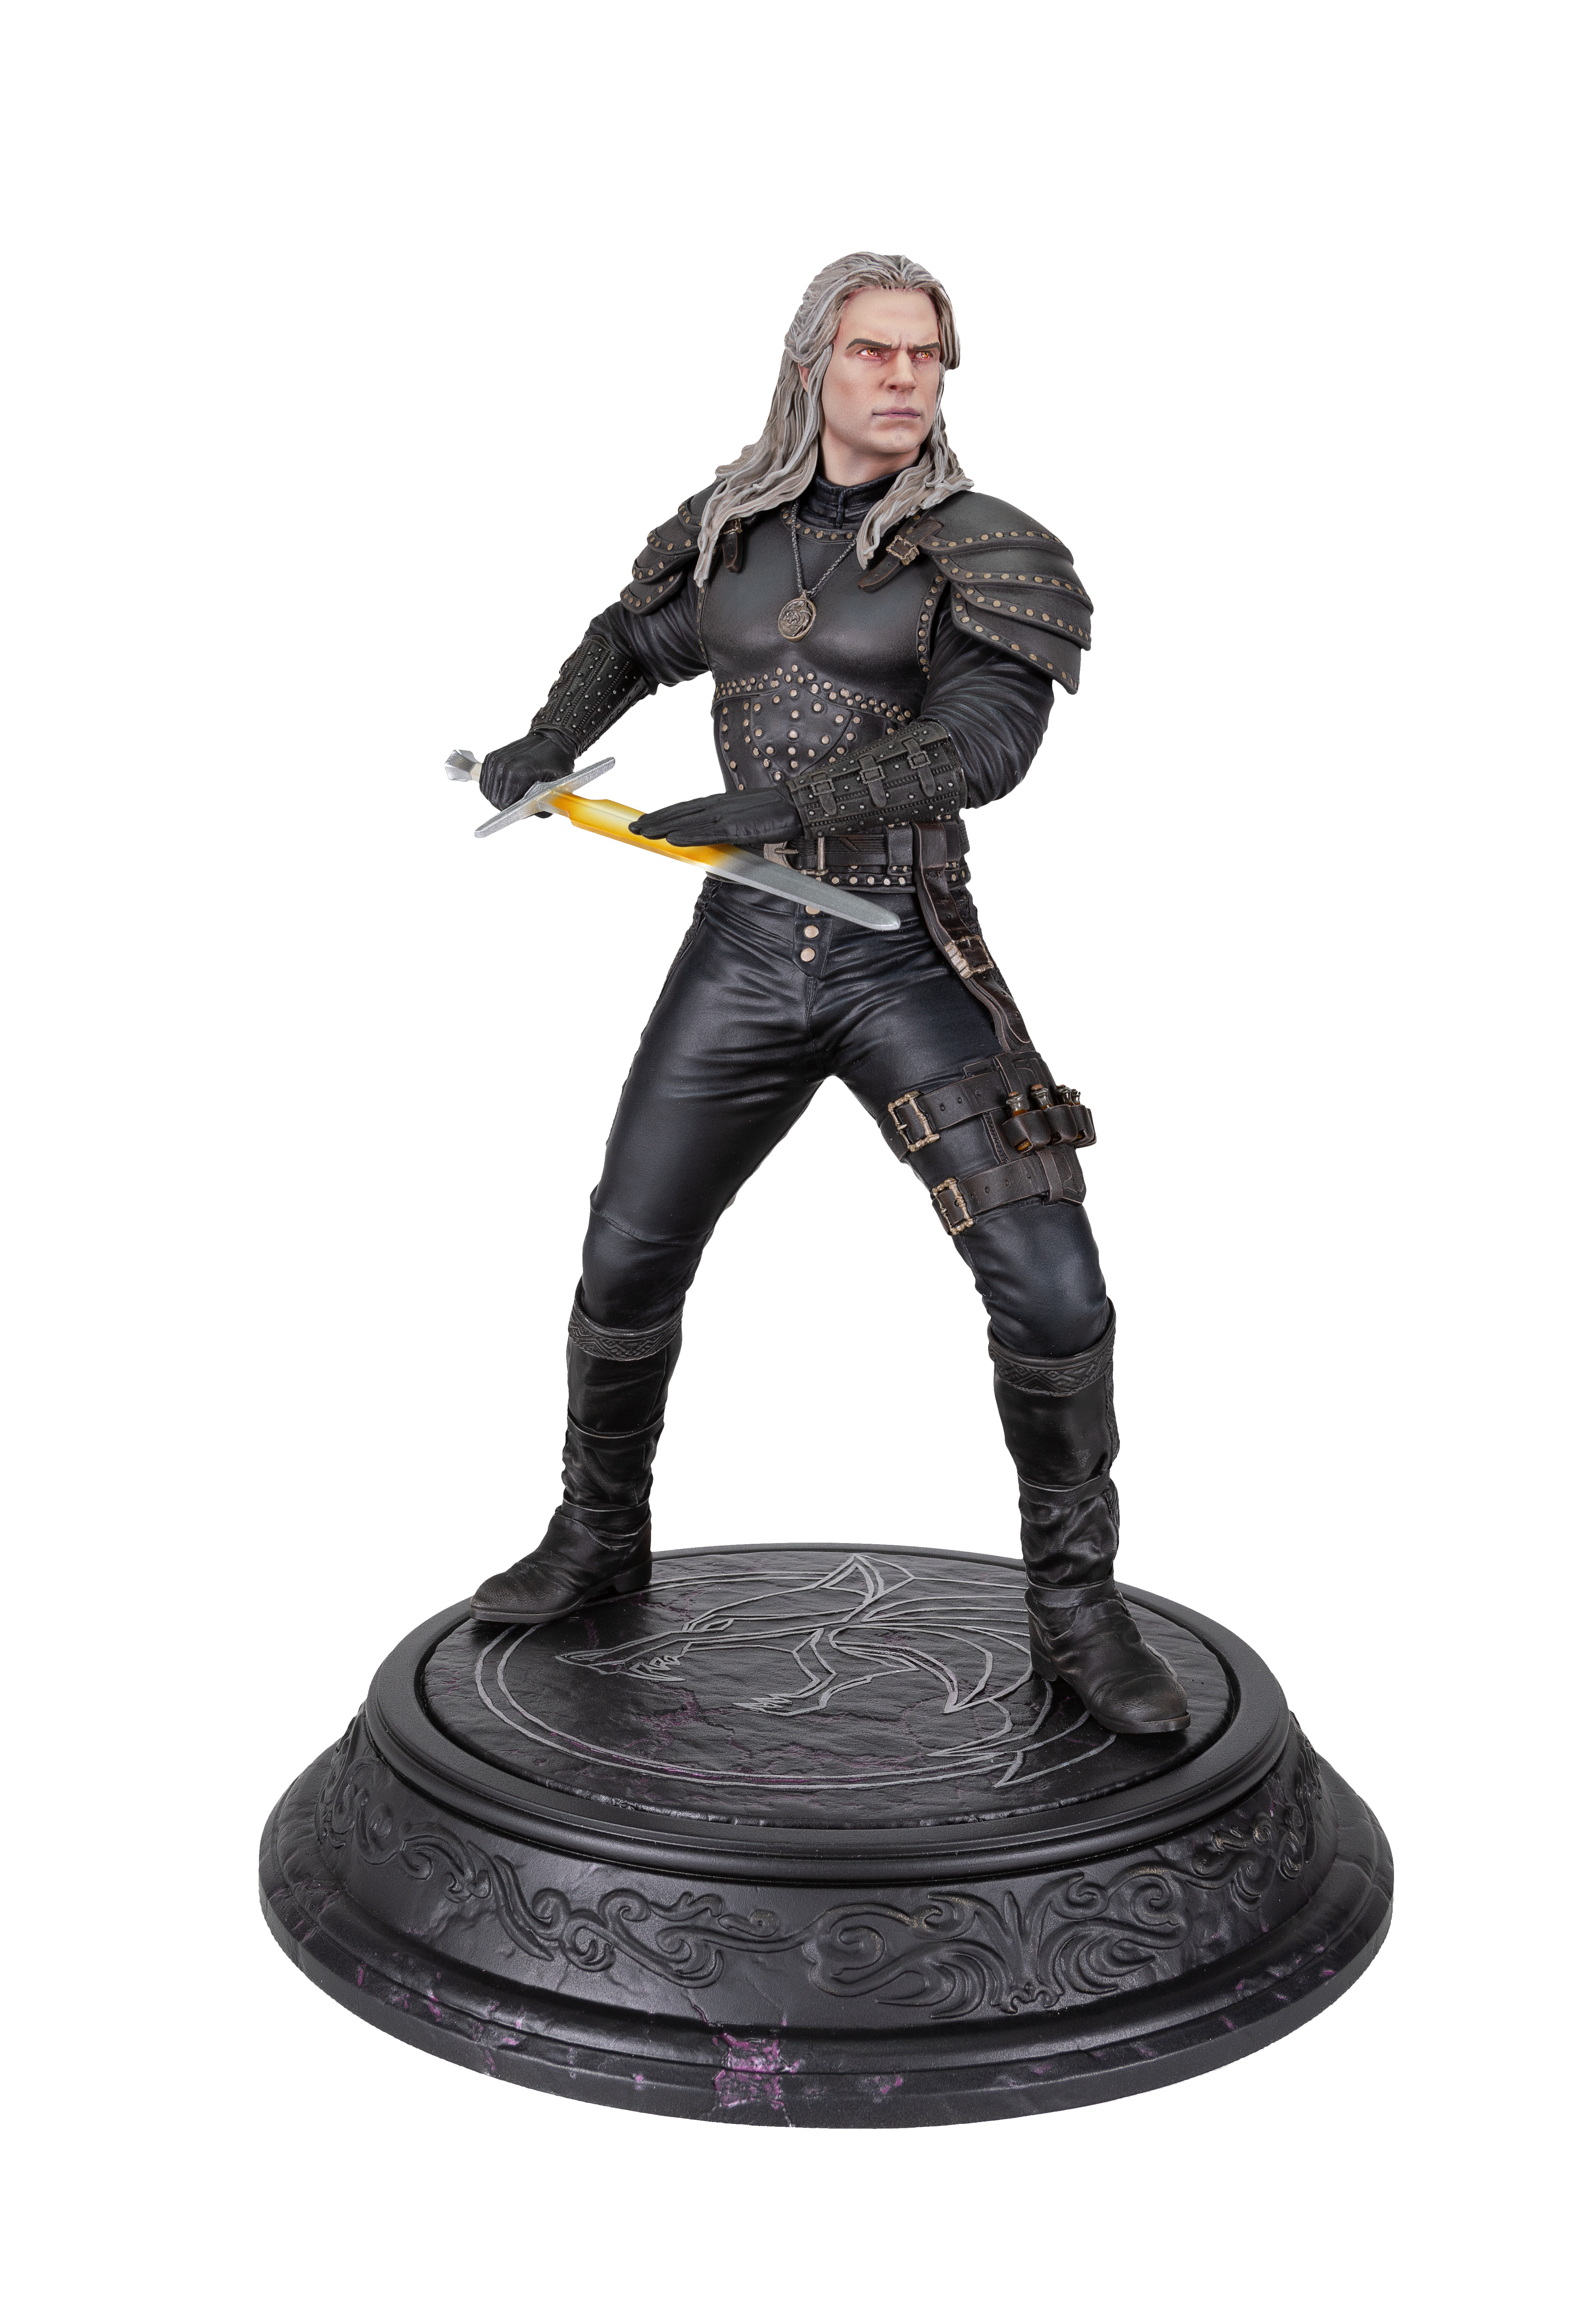 The Witcher Season 3 Geralt The White Wolf Figure